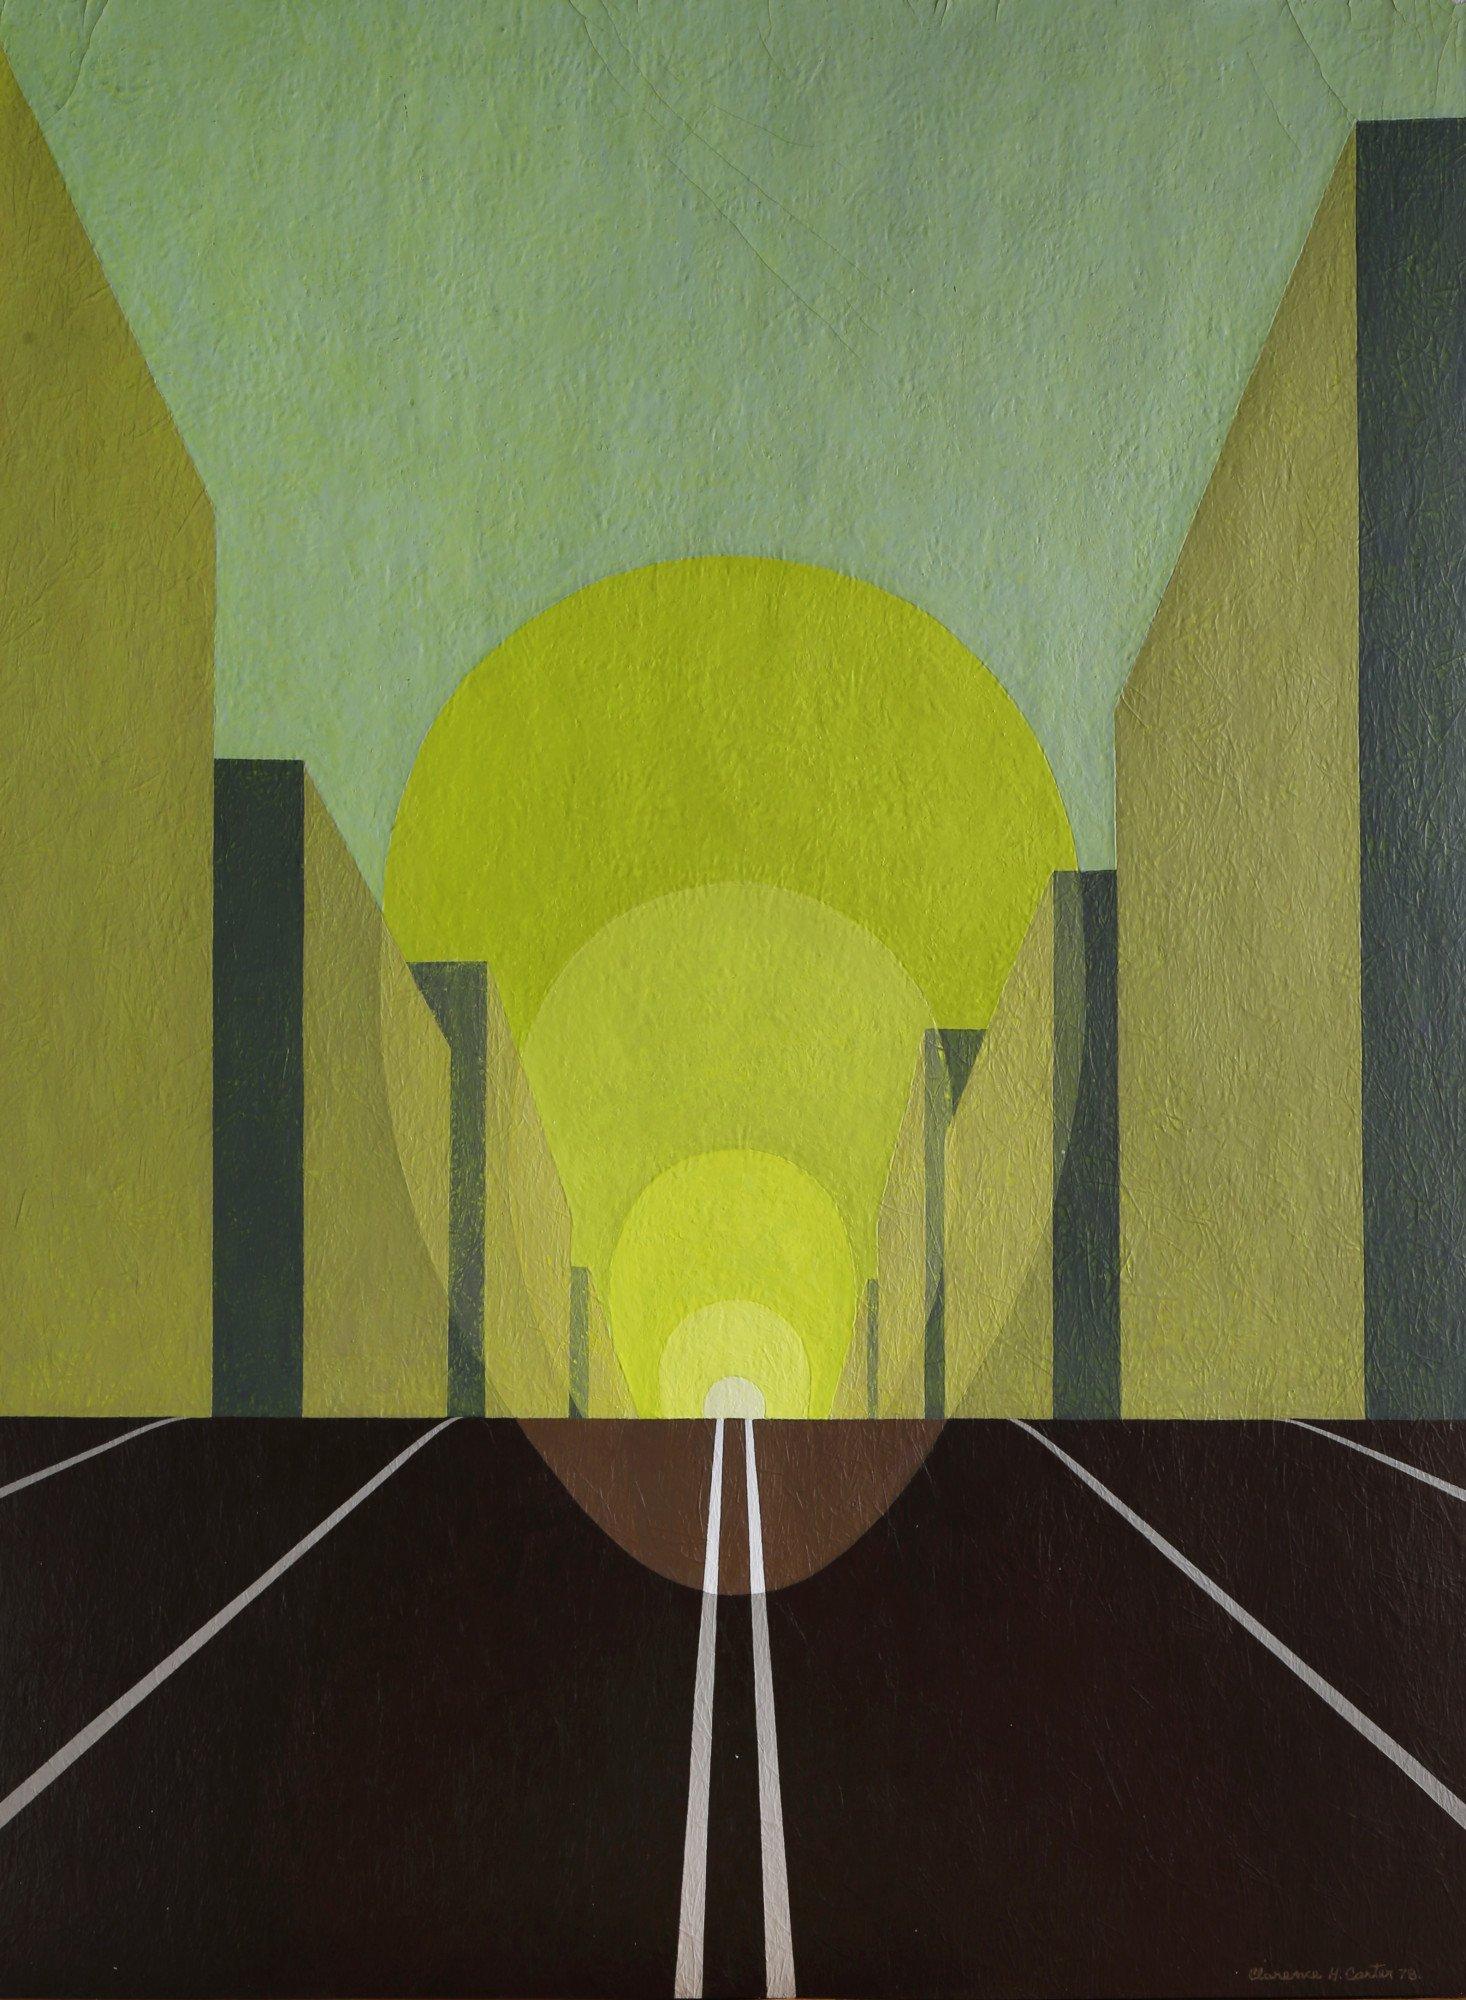 City Scape, Ovoid Geometrical Abstract Green & Brown Structures